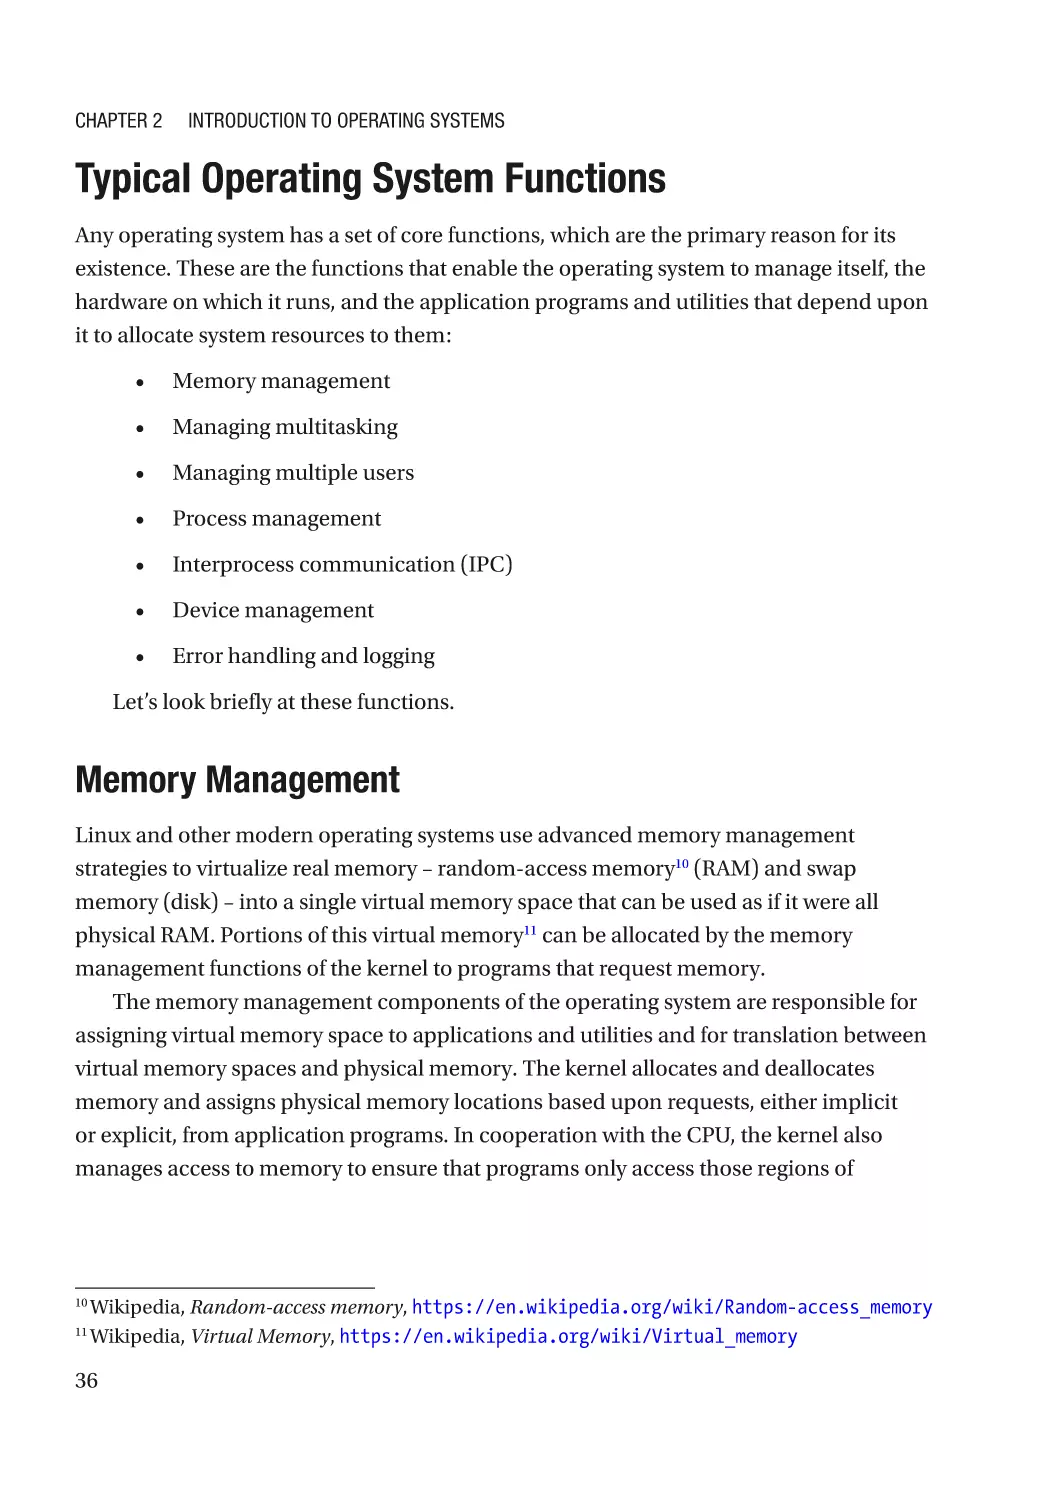 Typical Operating System Functions
Memory Management